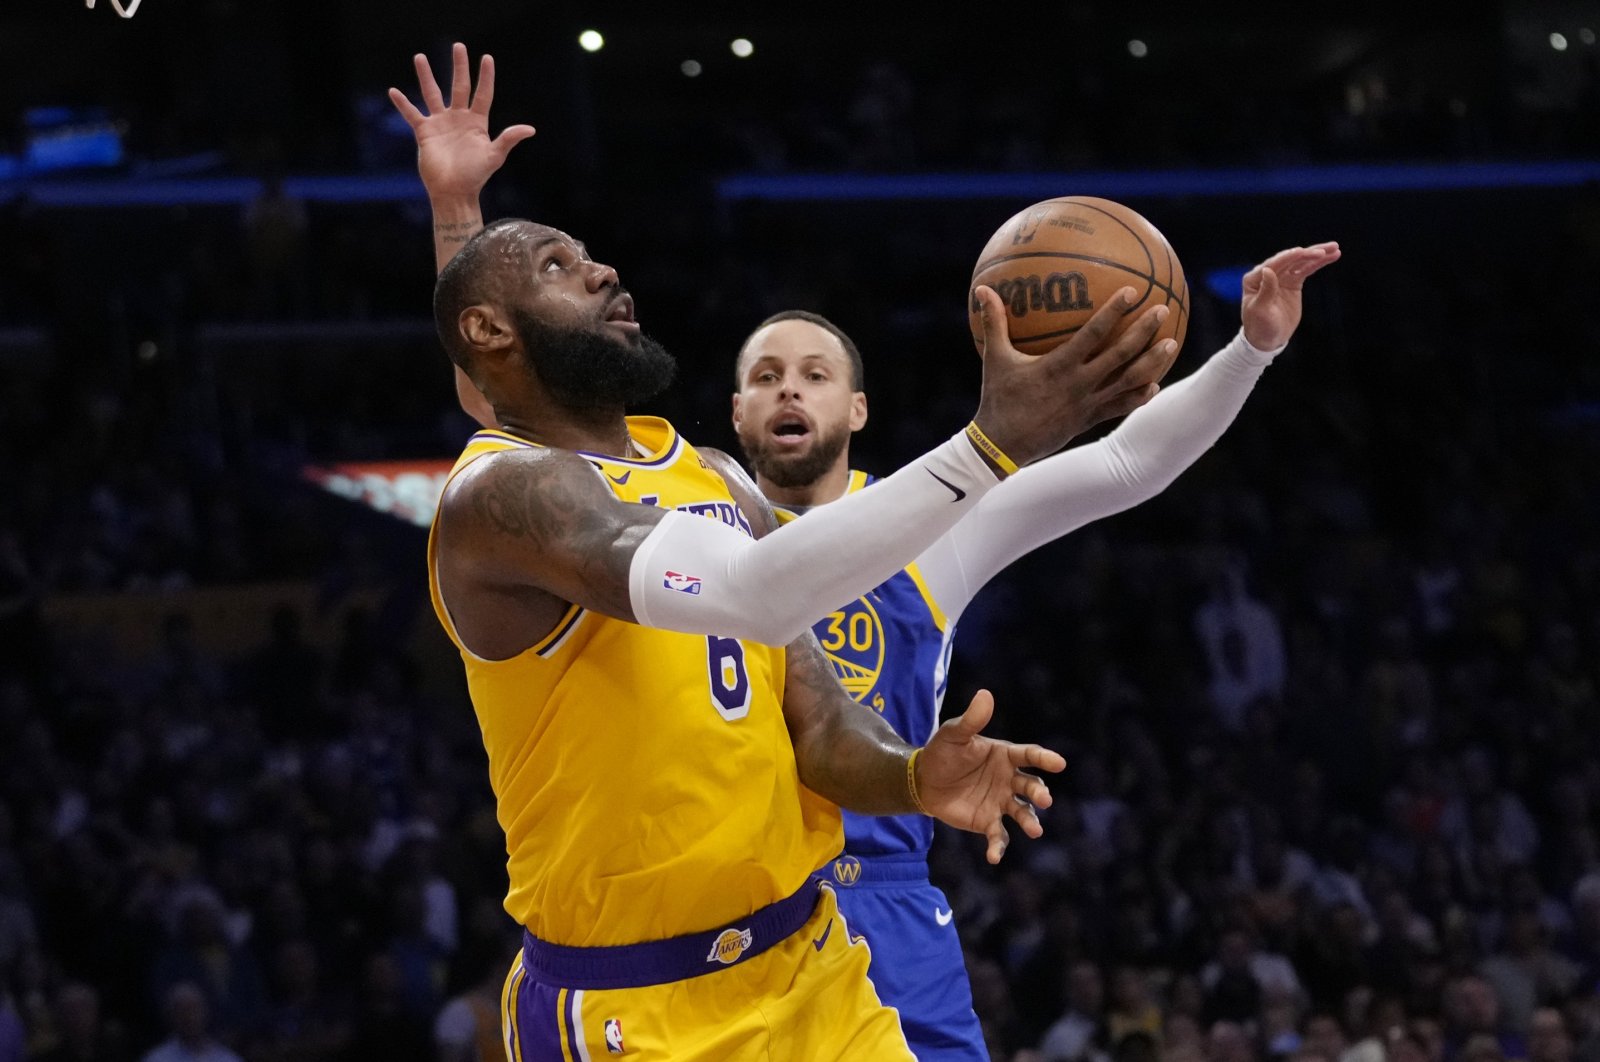 Lakers forward LeBron James scores past Golden State Warriors guard Stephen Curry in an NBA basketball Western Conference semifinal series Friday, May 12, 2023, in Los Angeles. (AP Photo/Ashley Landis)